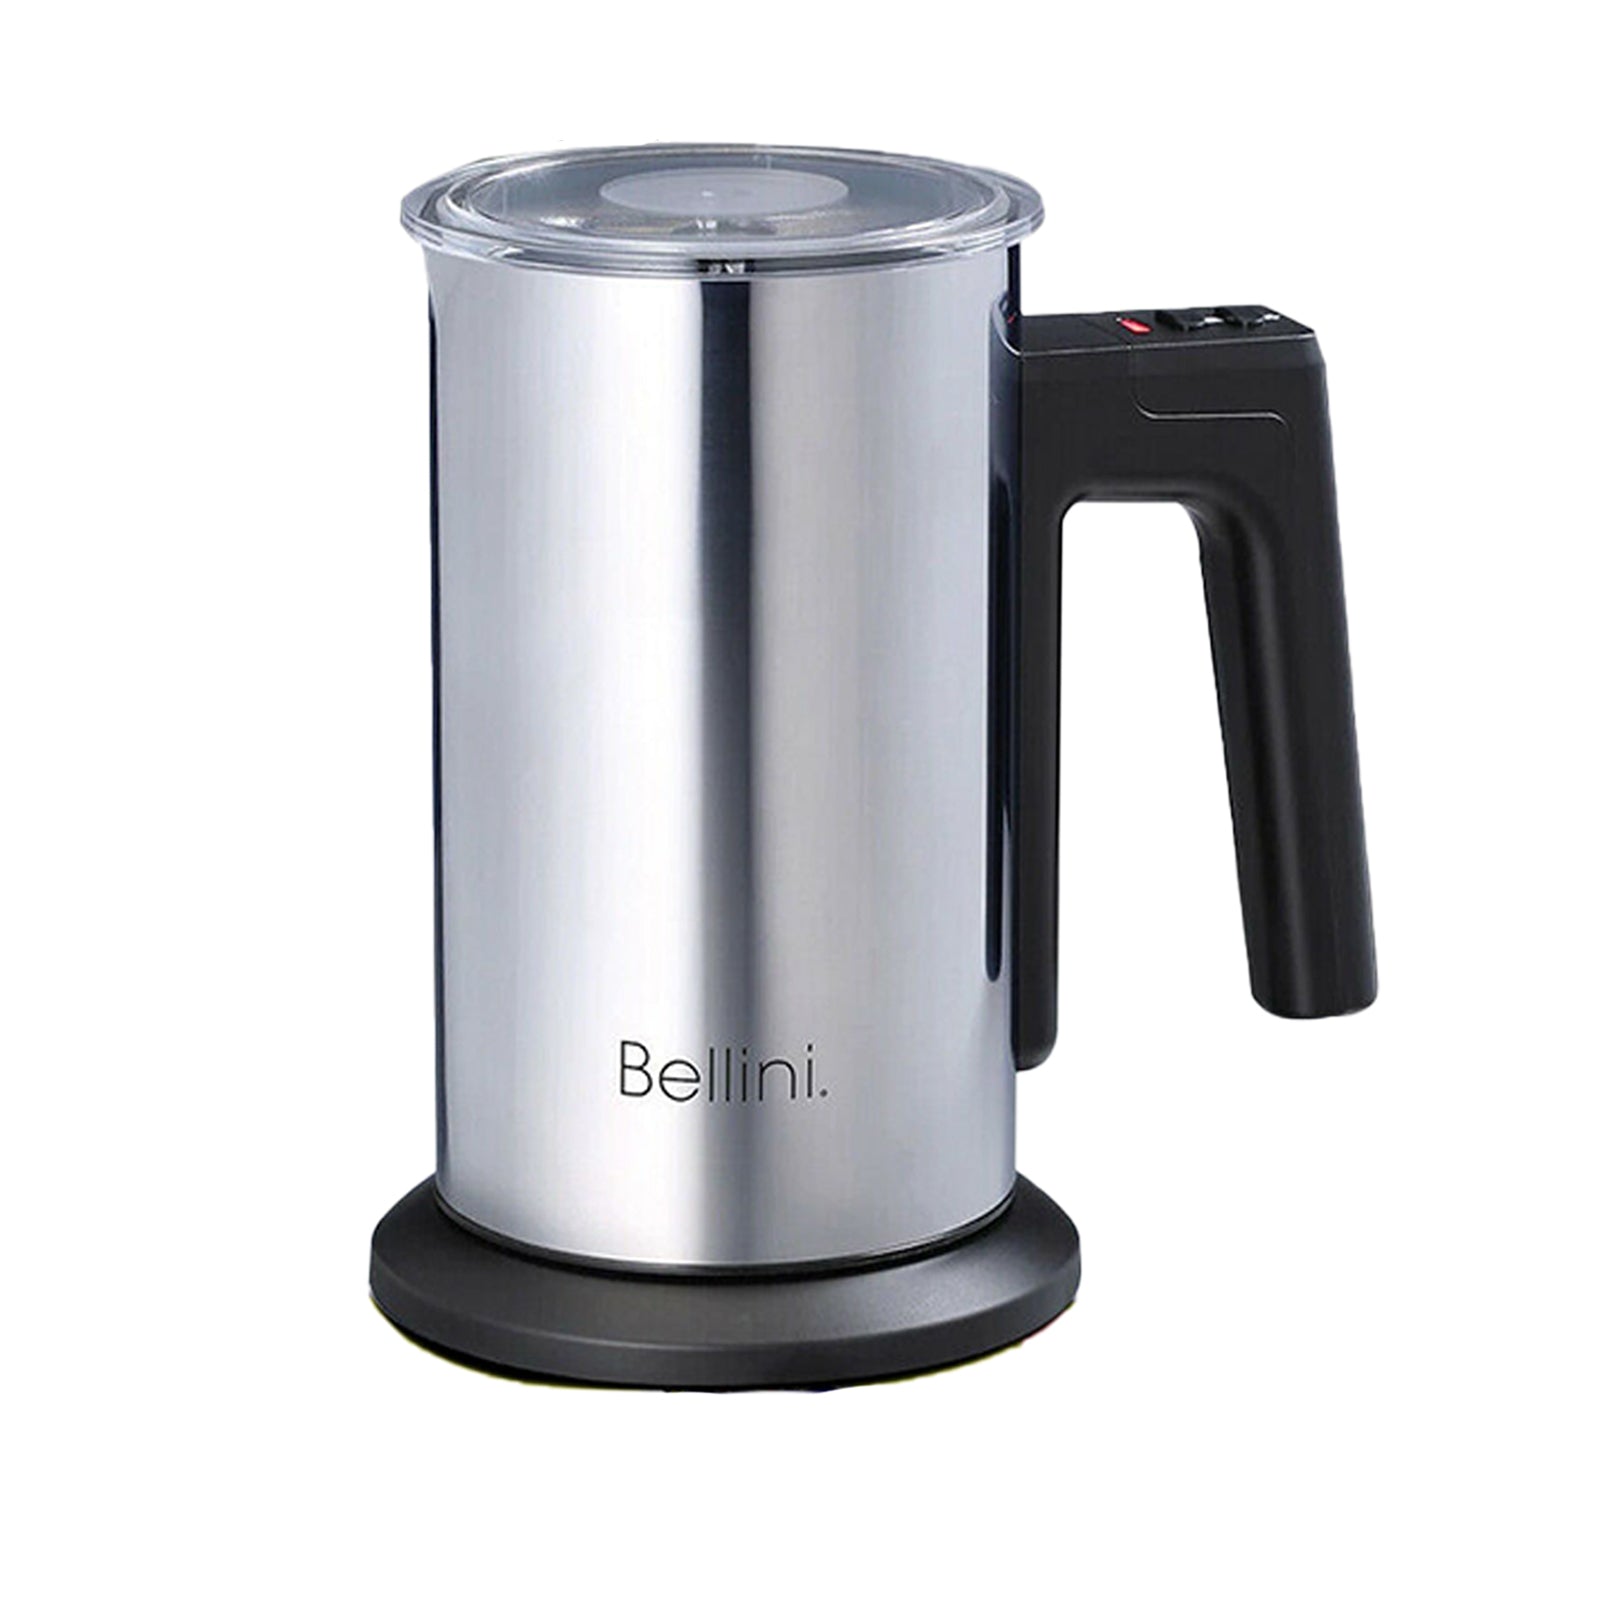 Milk Frother and Warmer - Bellini